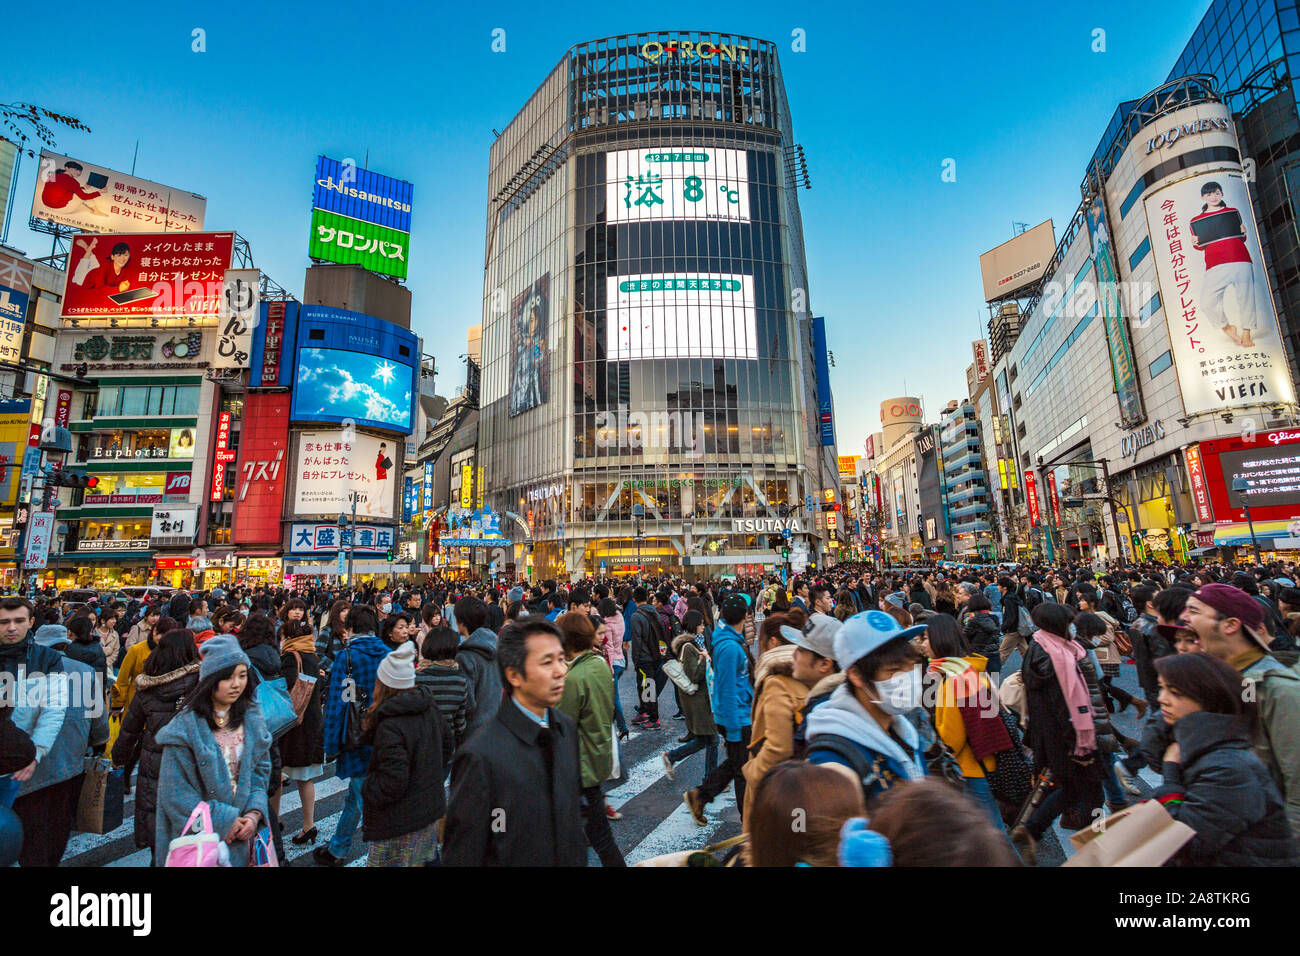 Shibuya Crossing, the busiest intersection in the World, Tokyo, Japan, Asia Stock Photo